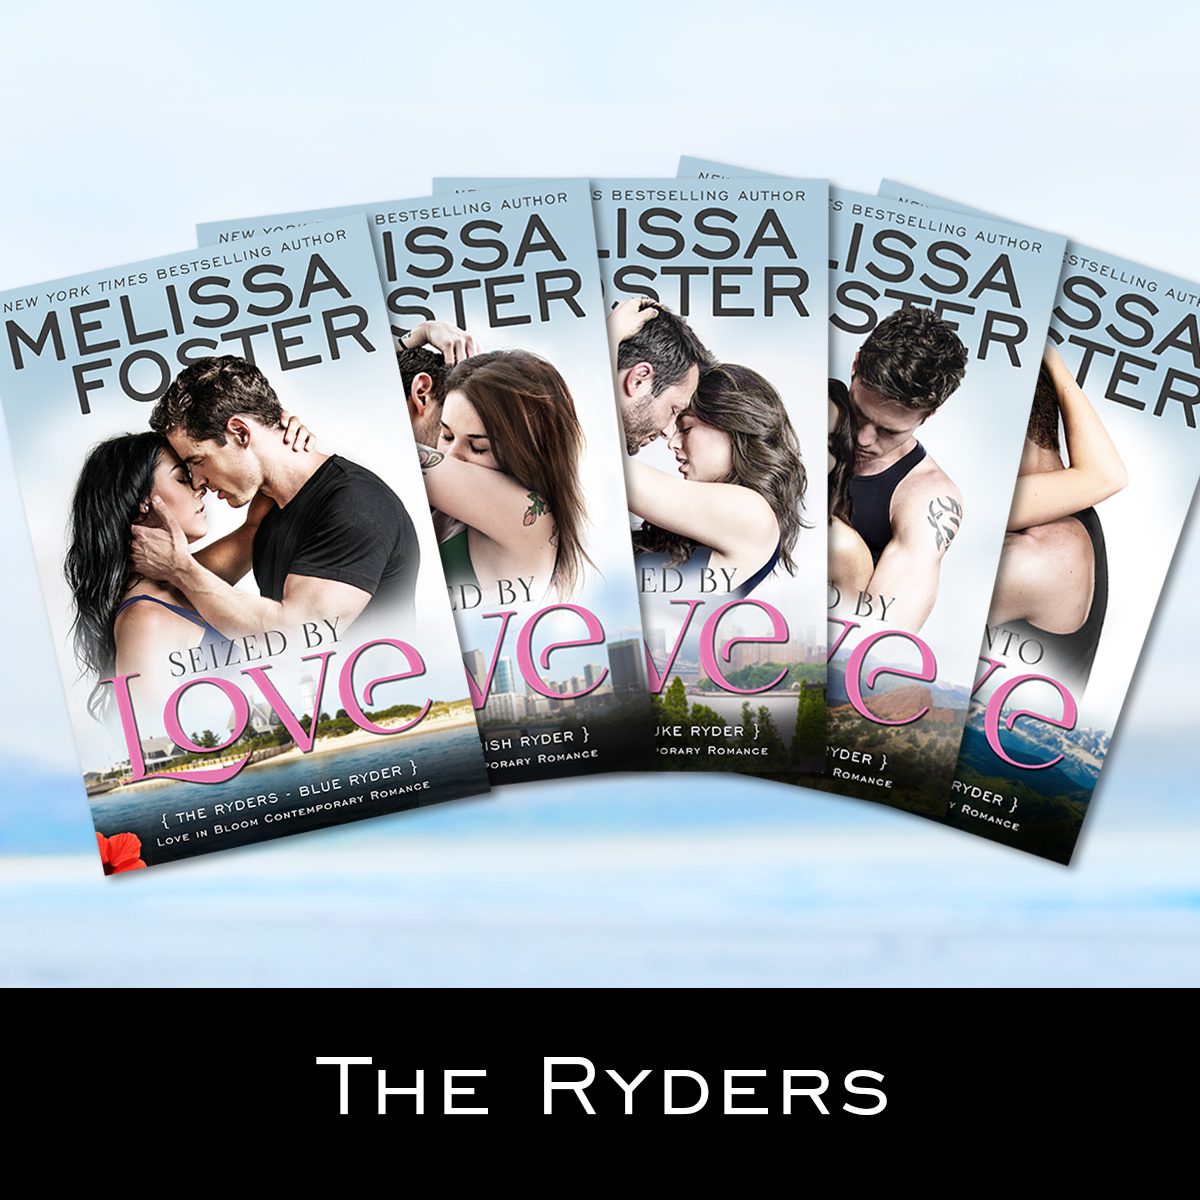 The Ryders by Melissa Foster